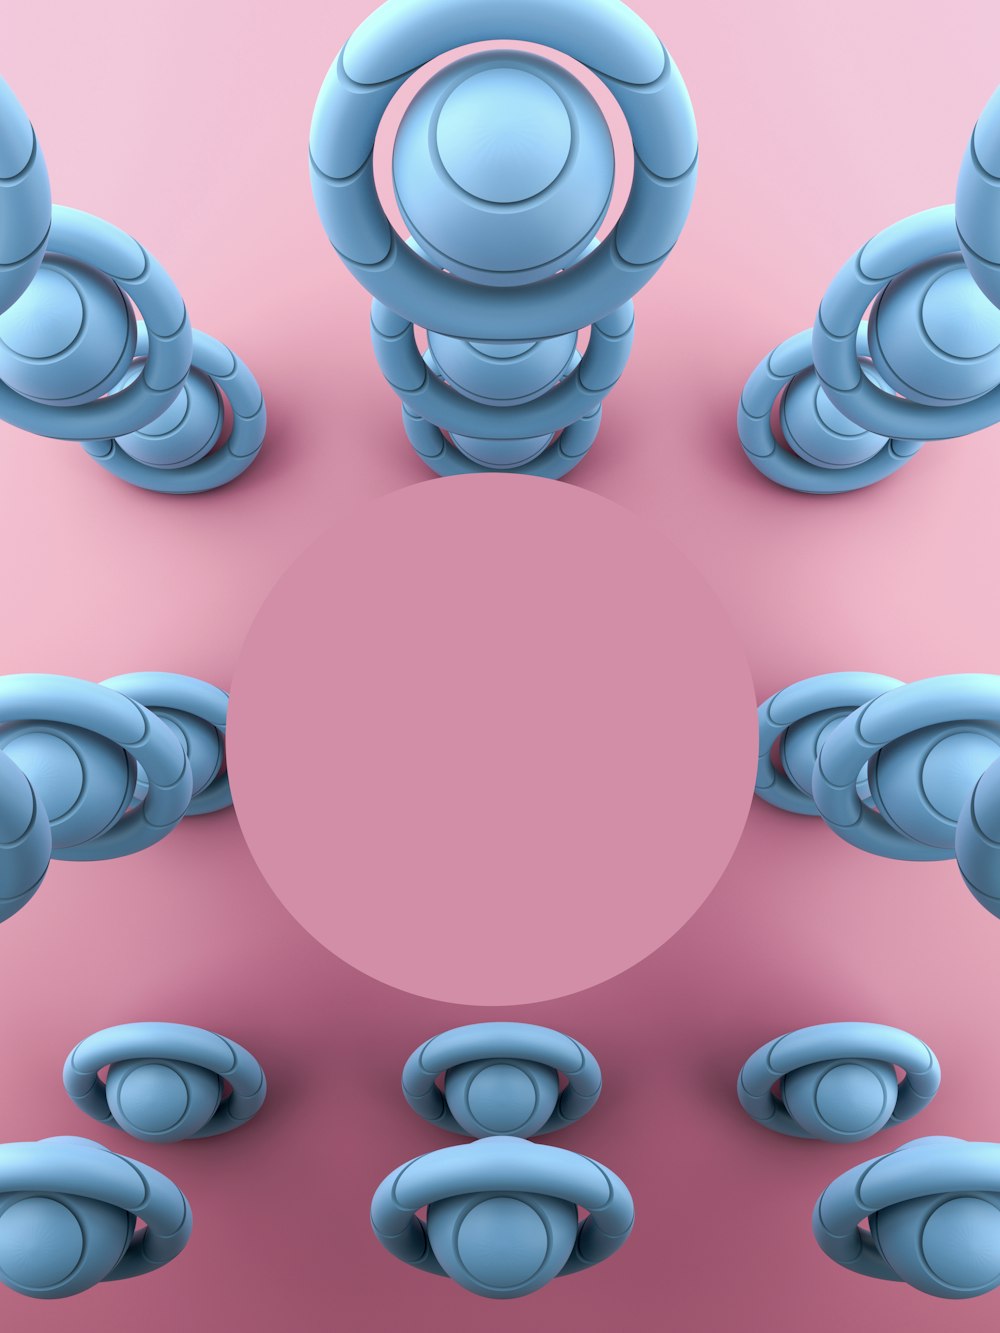 a group of blue objects sitting on top of a pink surface